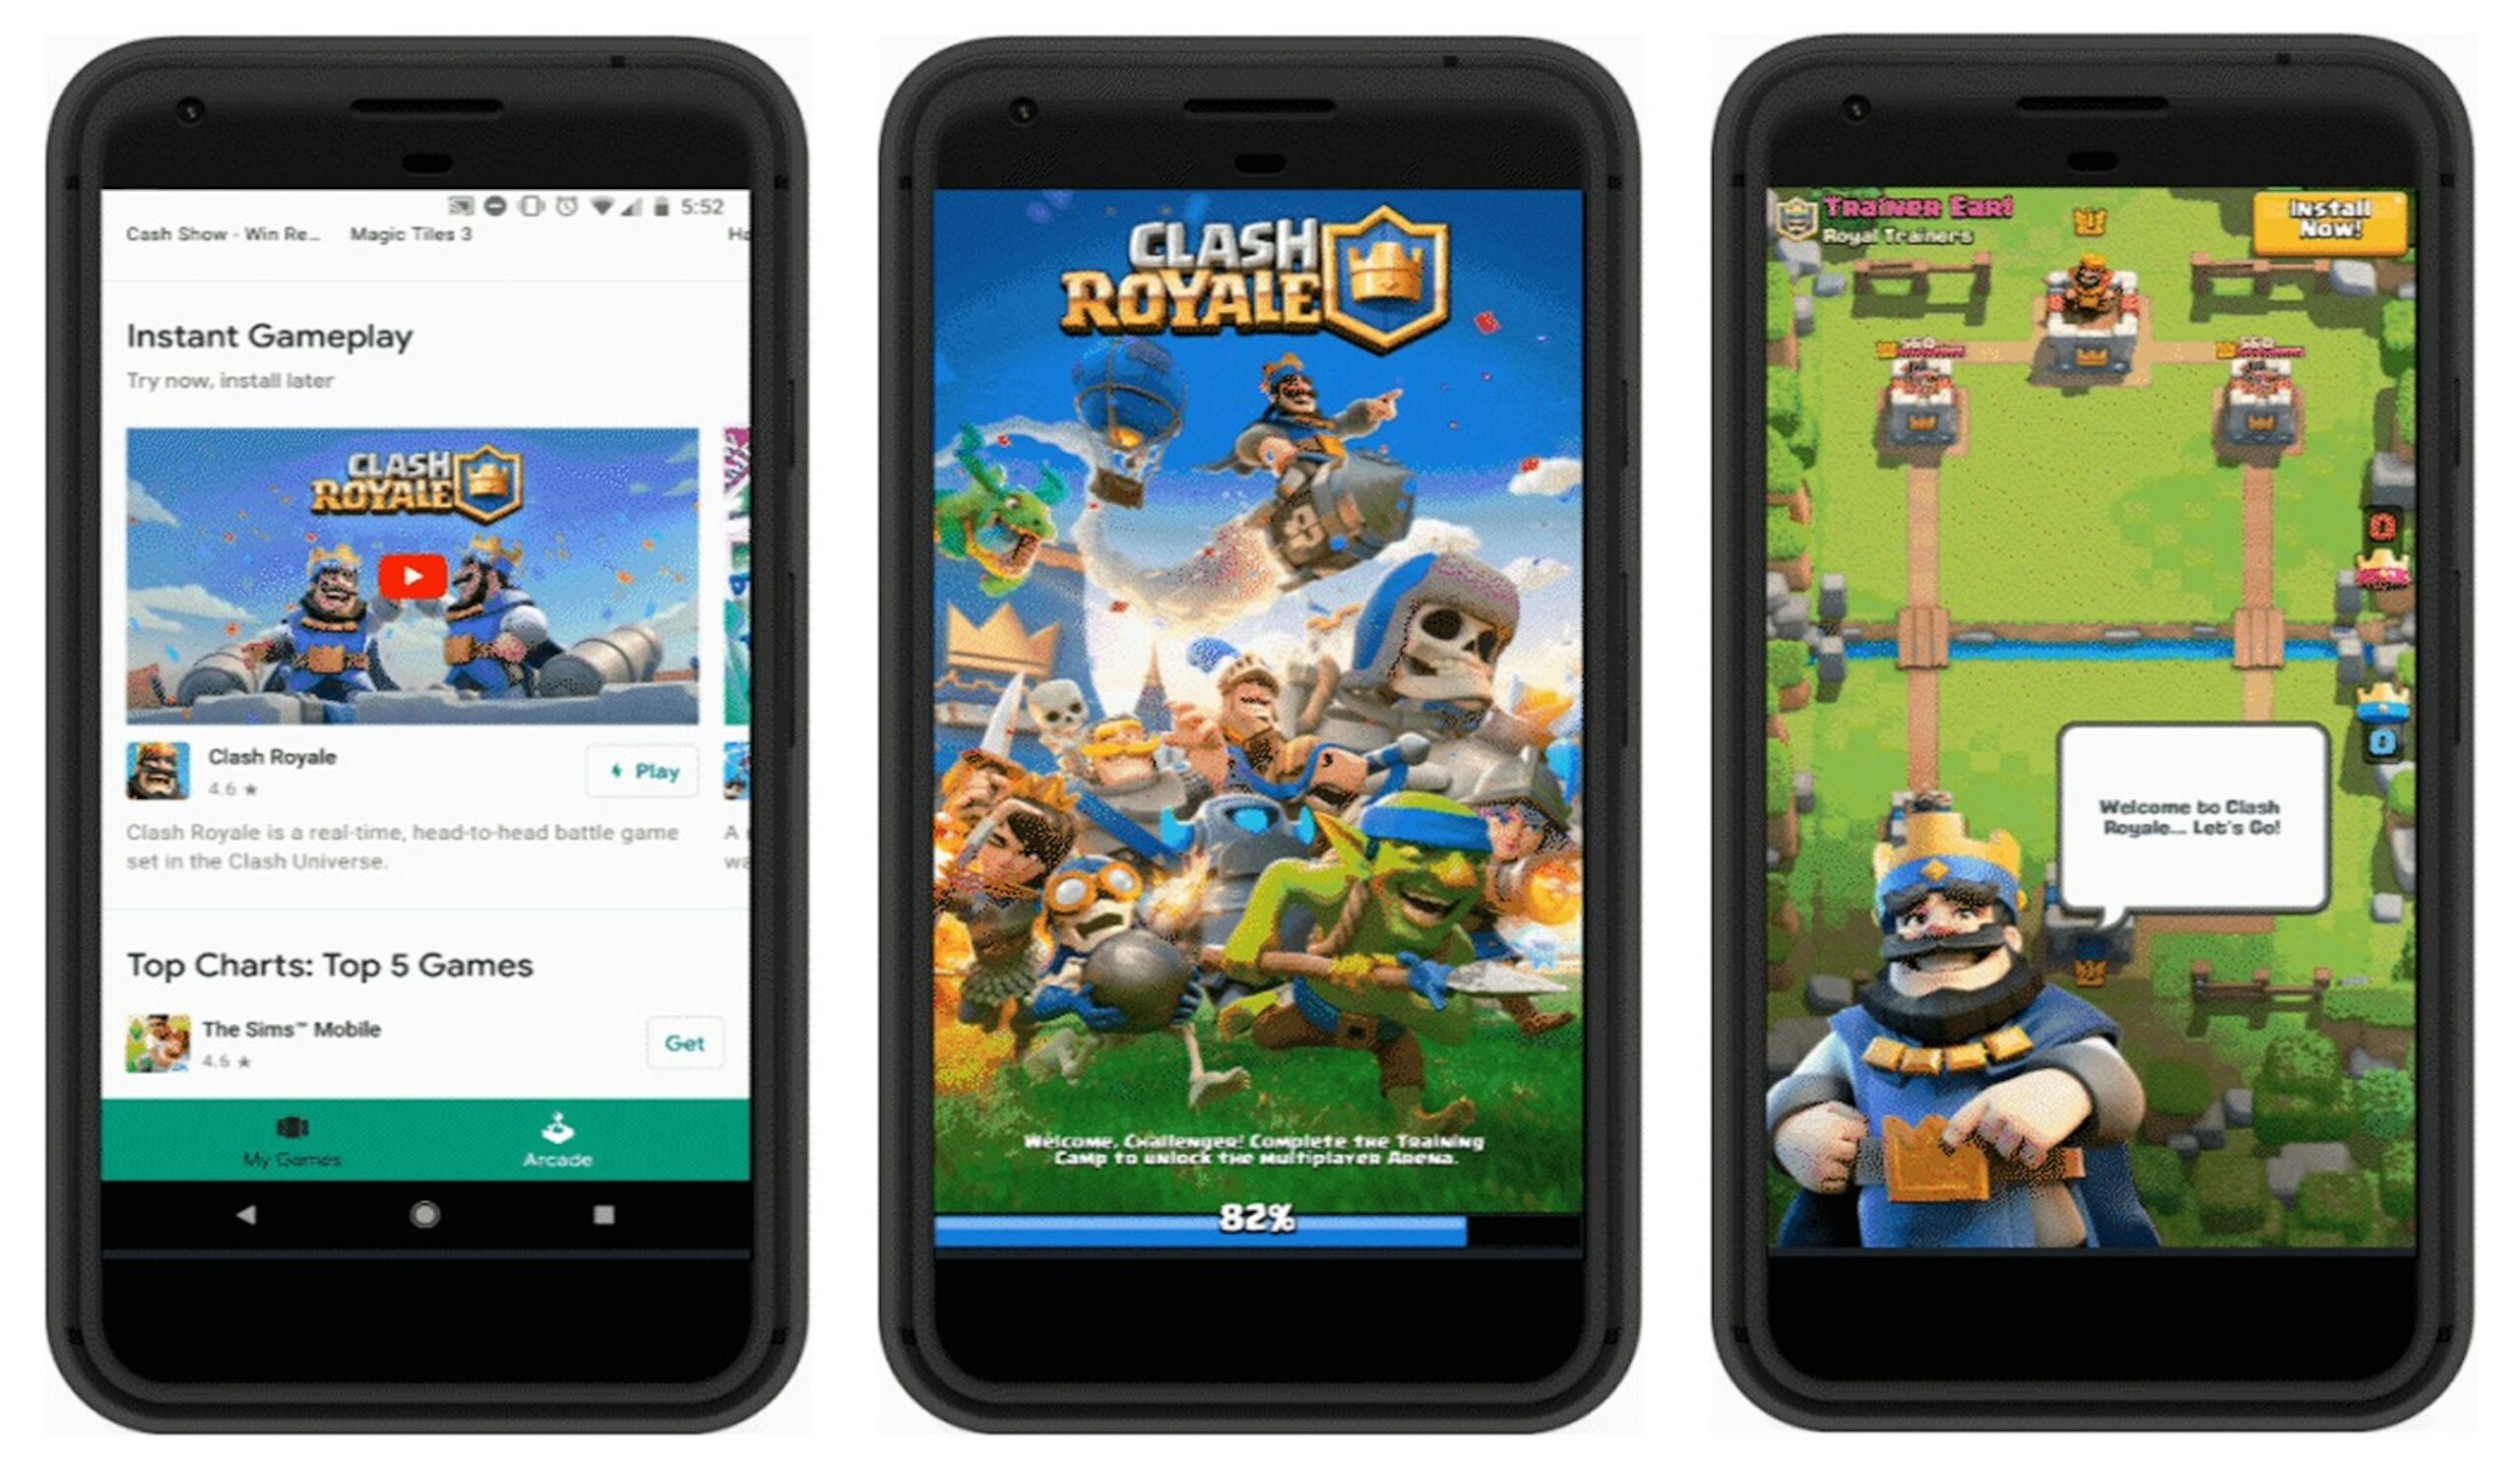 Google Play Instant lets you try games without having to install